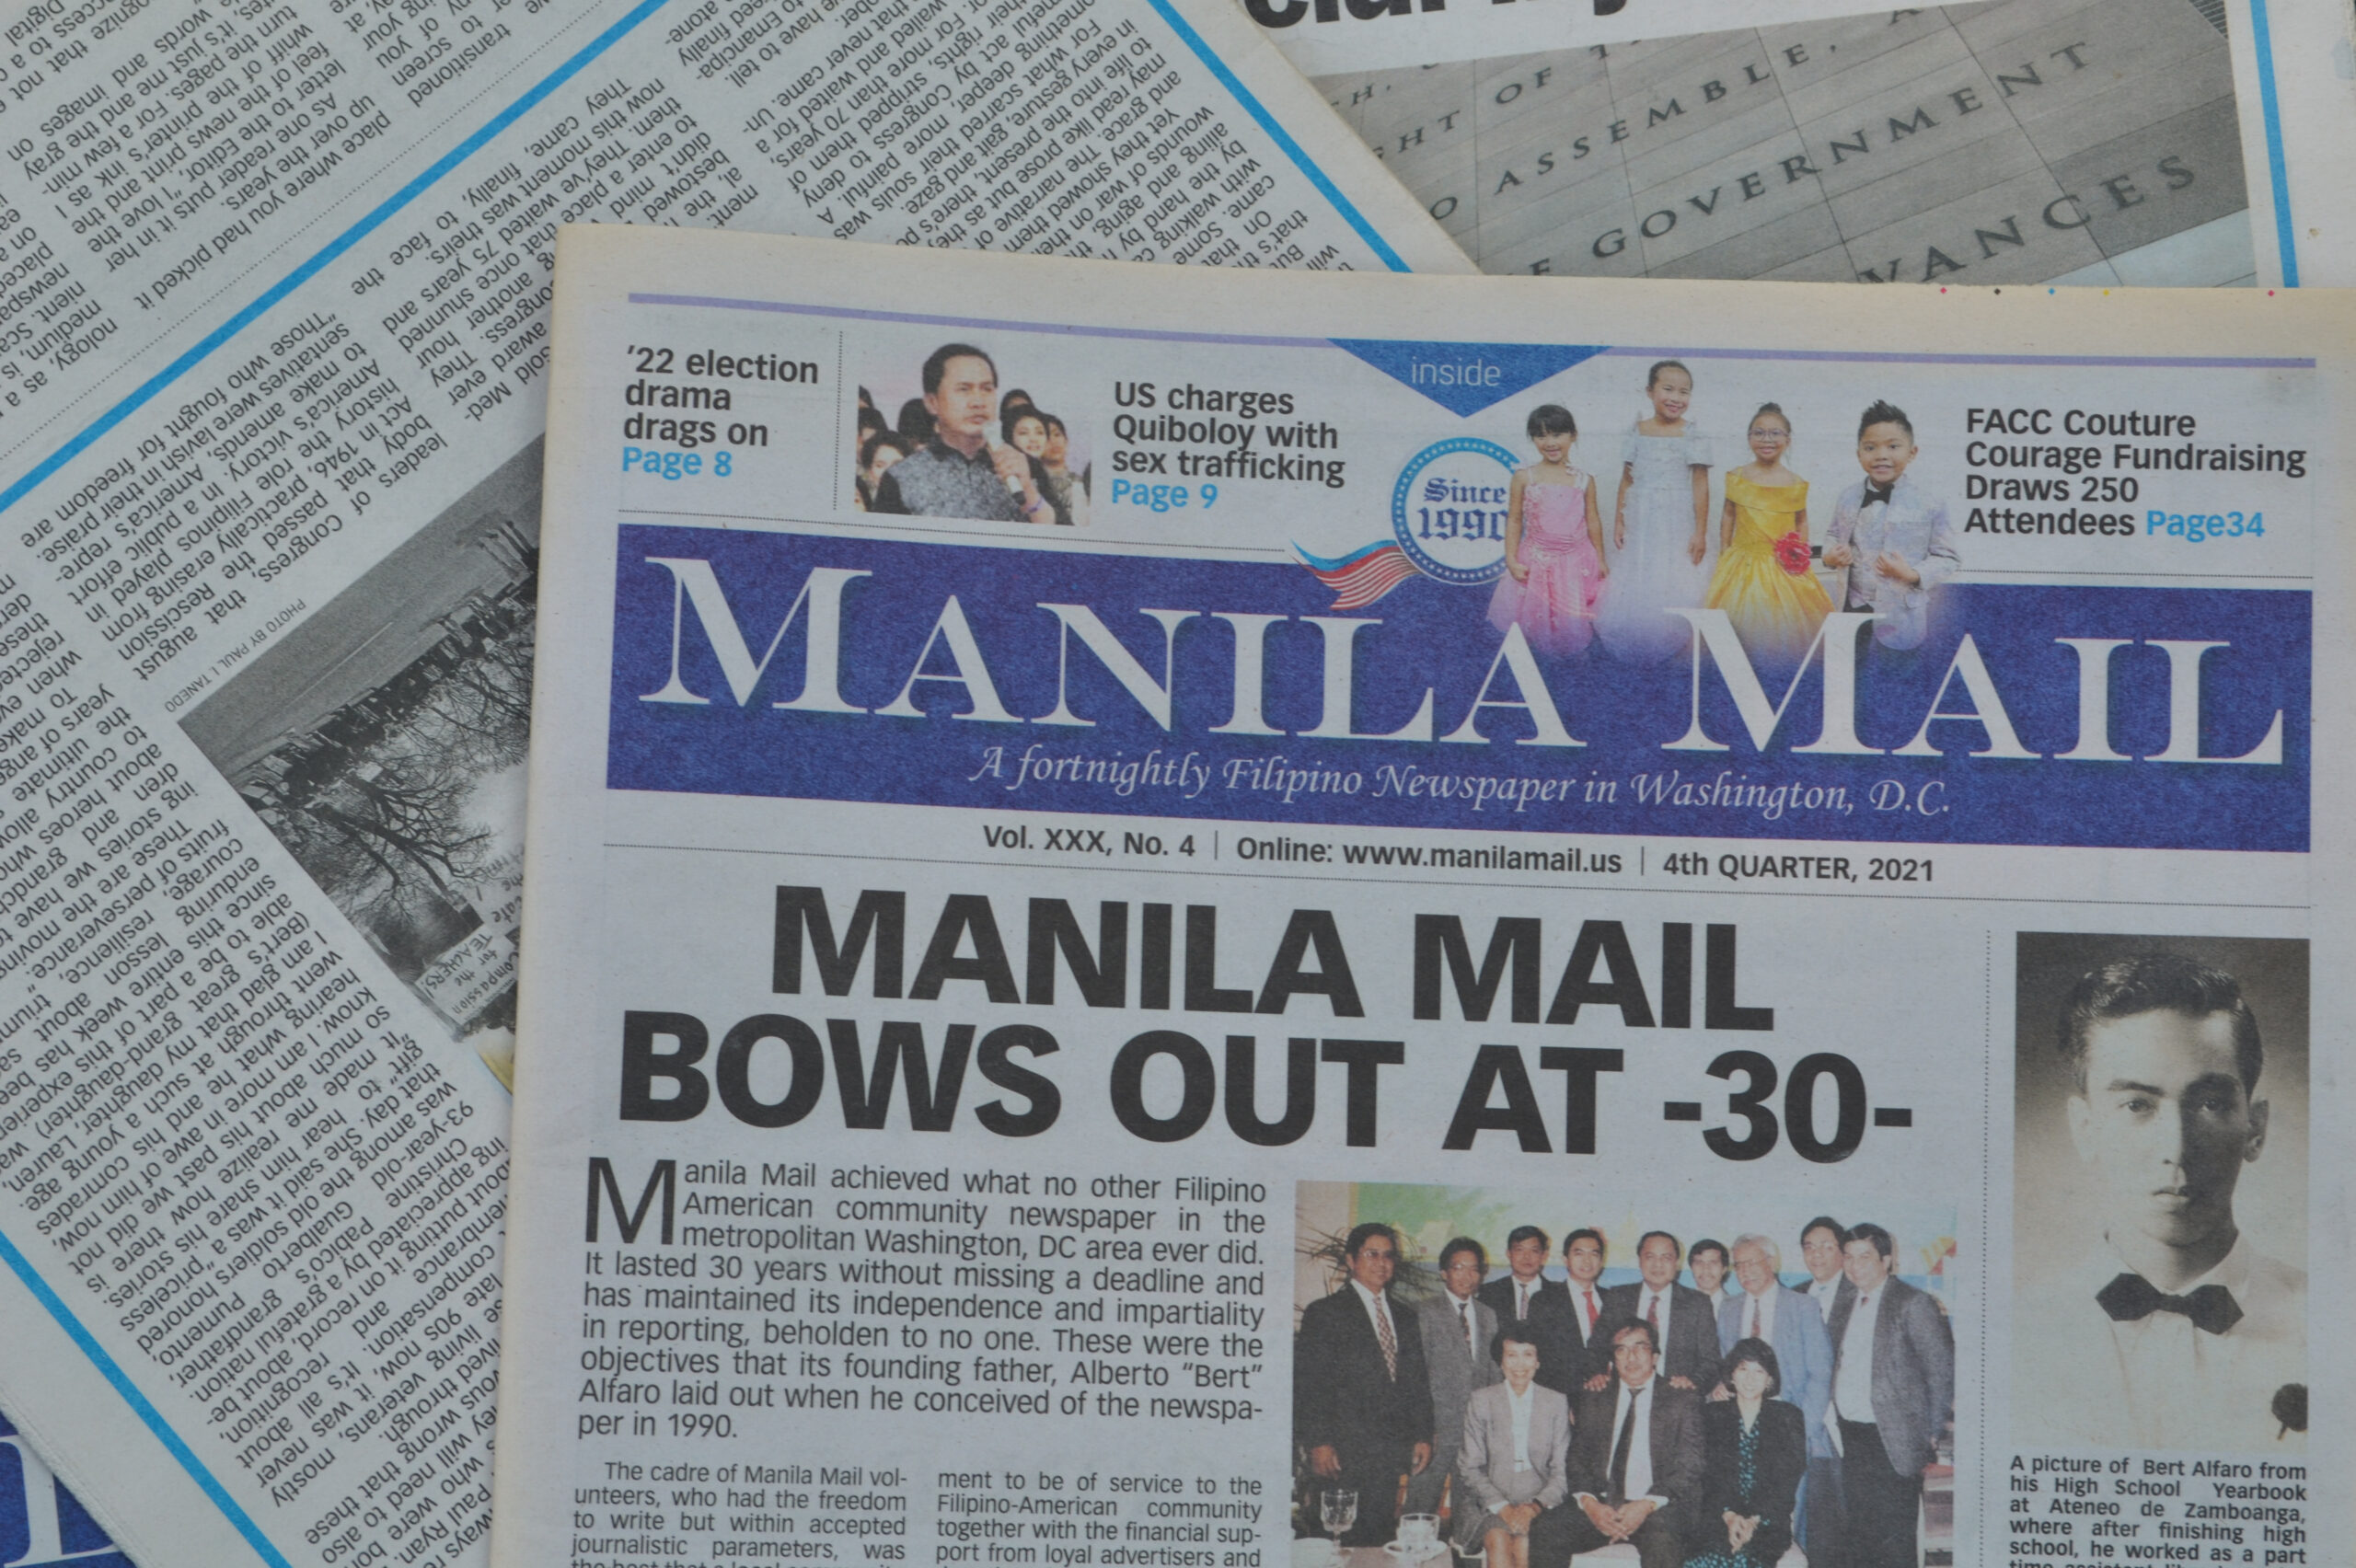 Photo of a copy of Manila Mail with the headline "Manila Mail bows out at -30-"